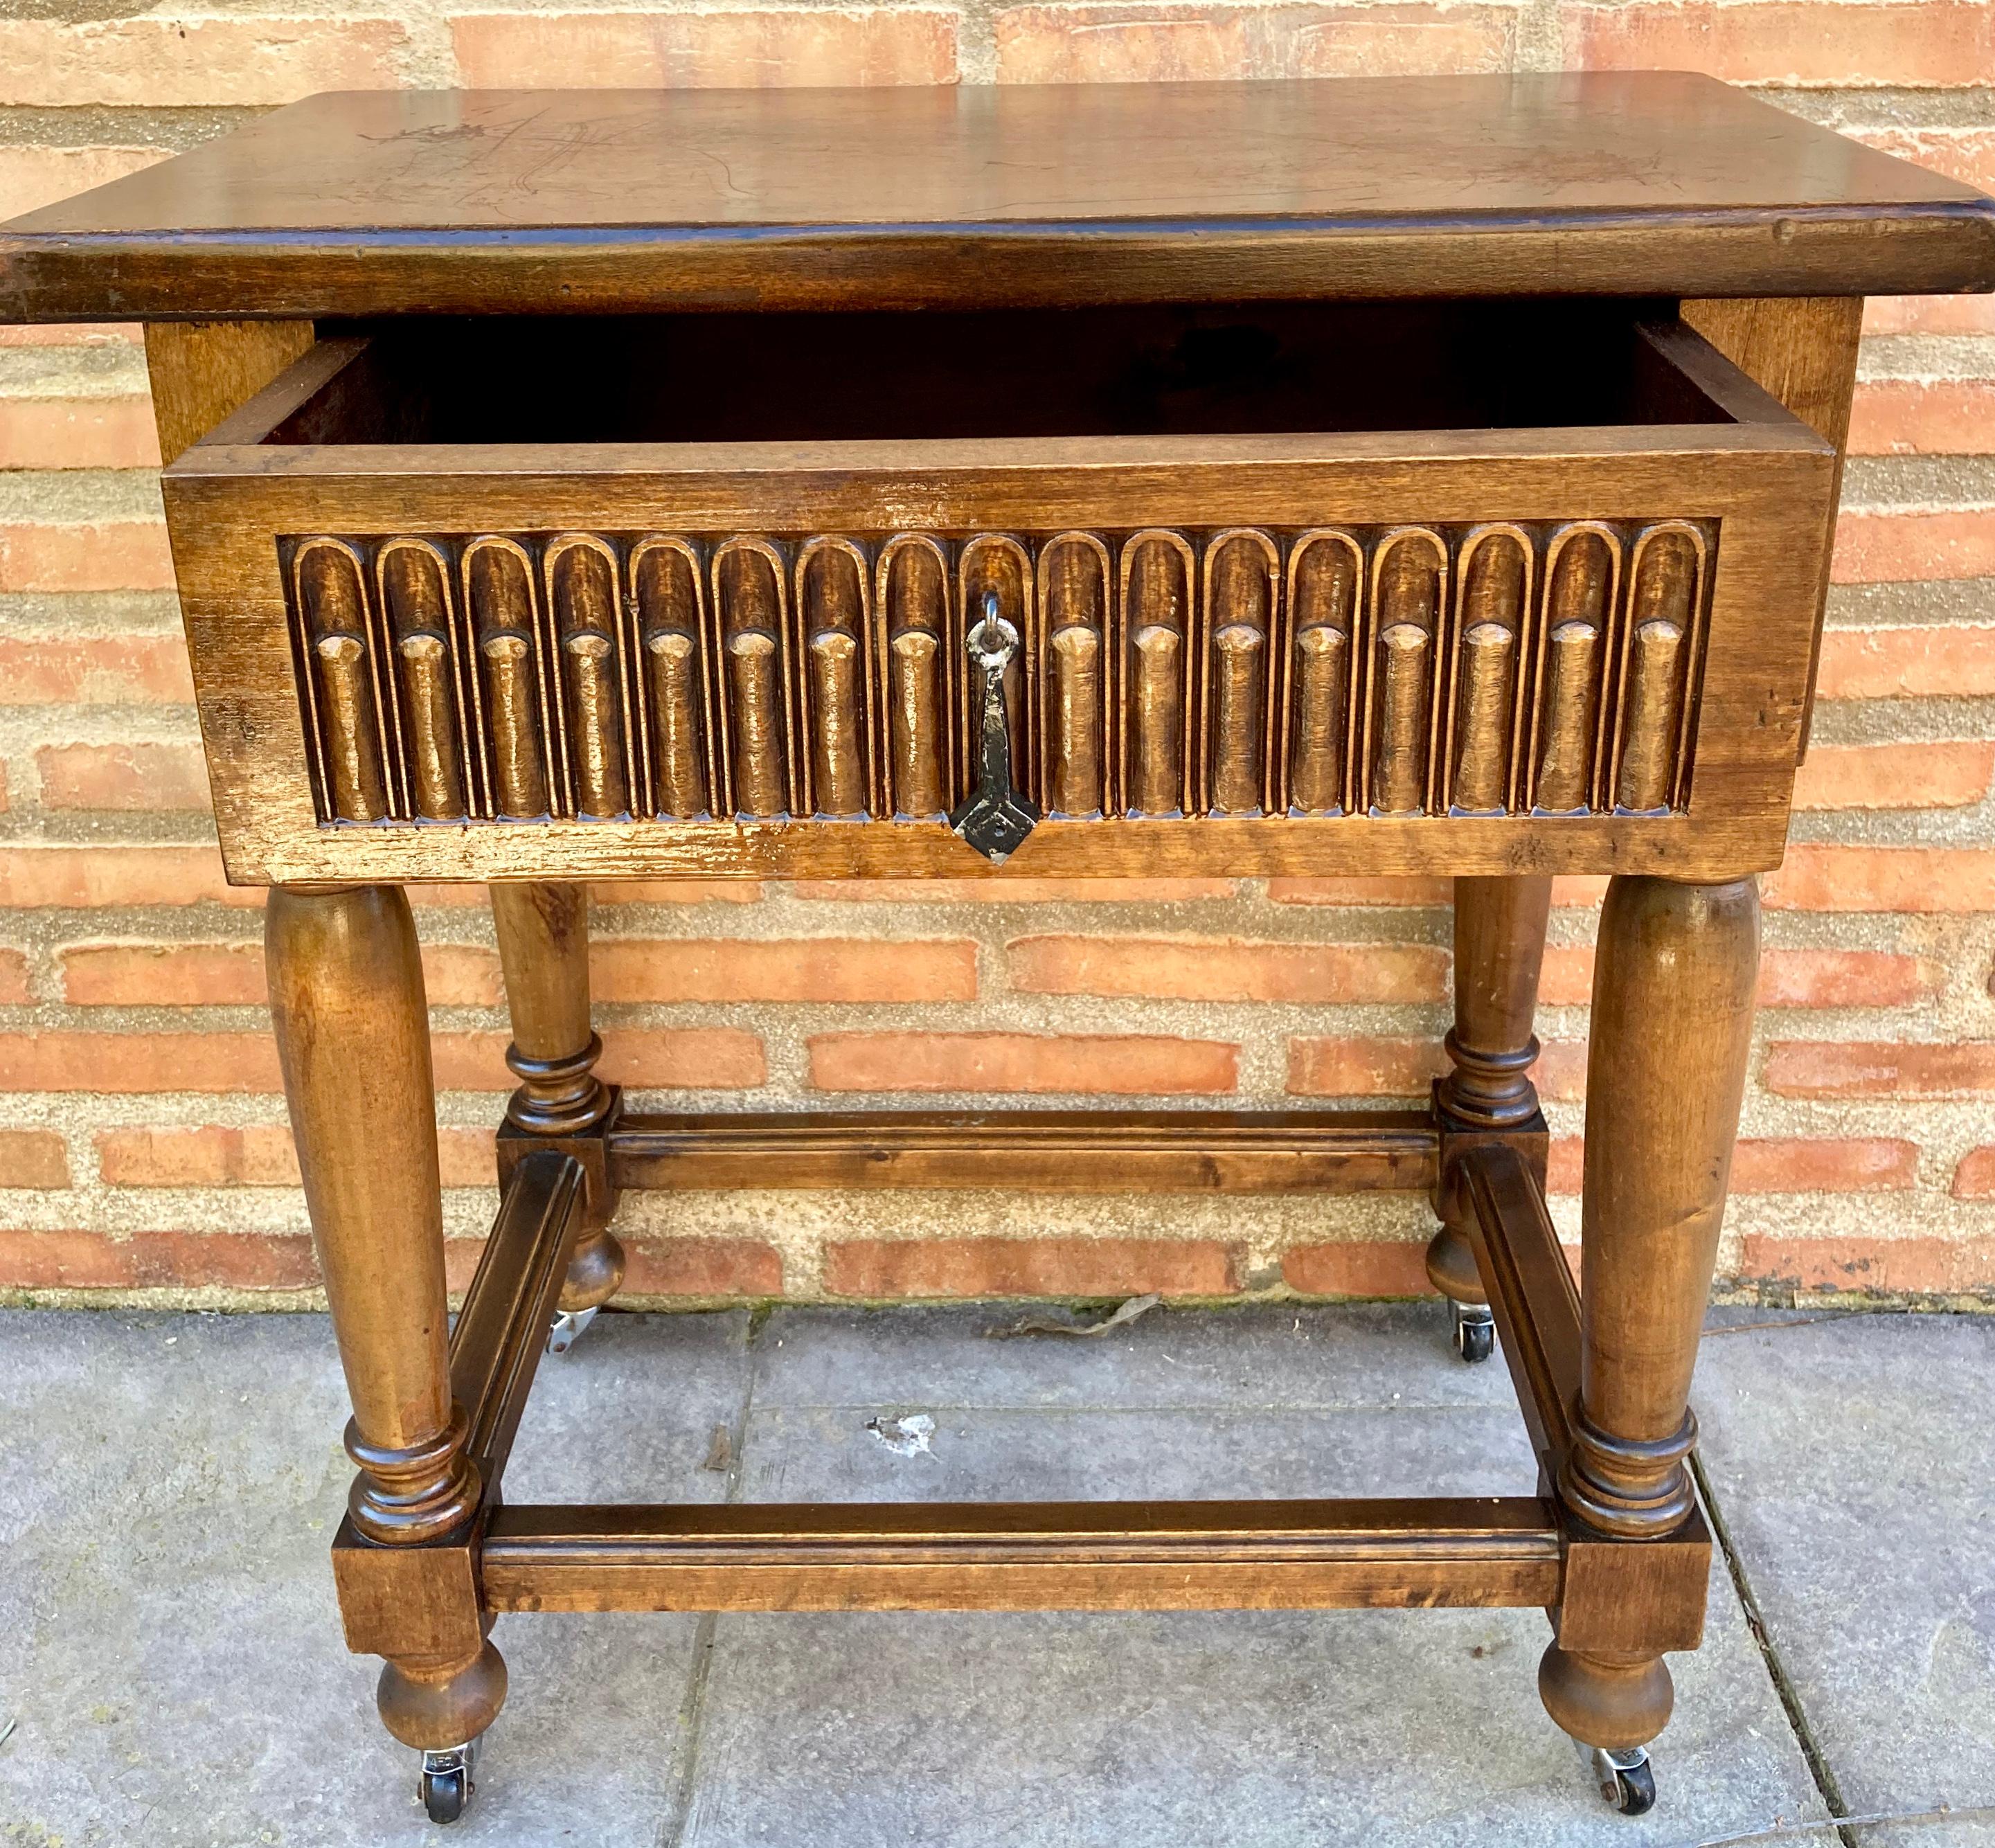 French Walnut Side Table with Drawer, Carved Arches and Column Legs with Wheels, 2